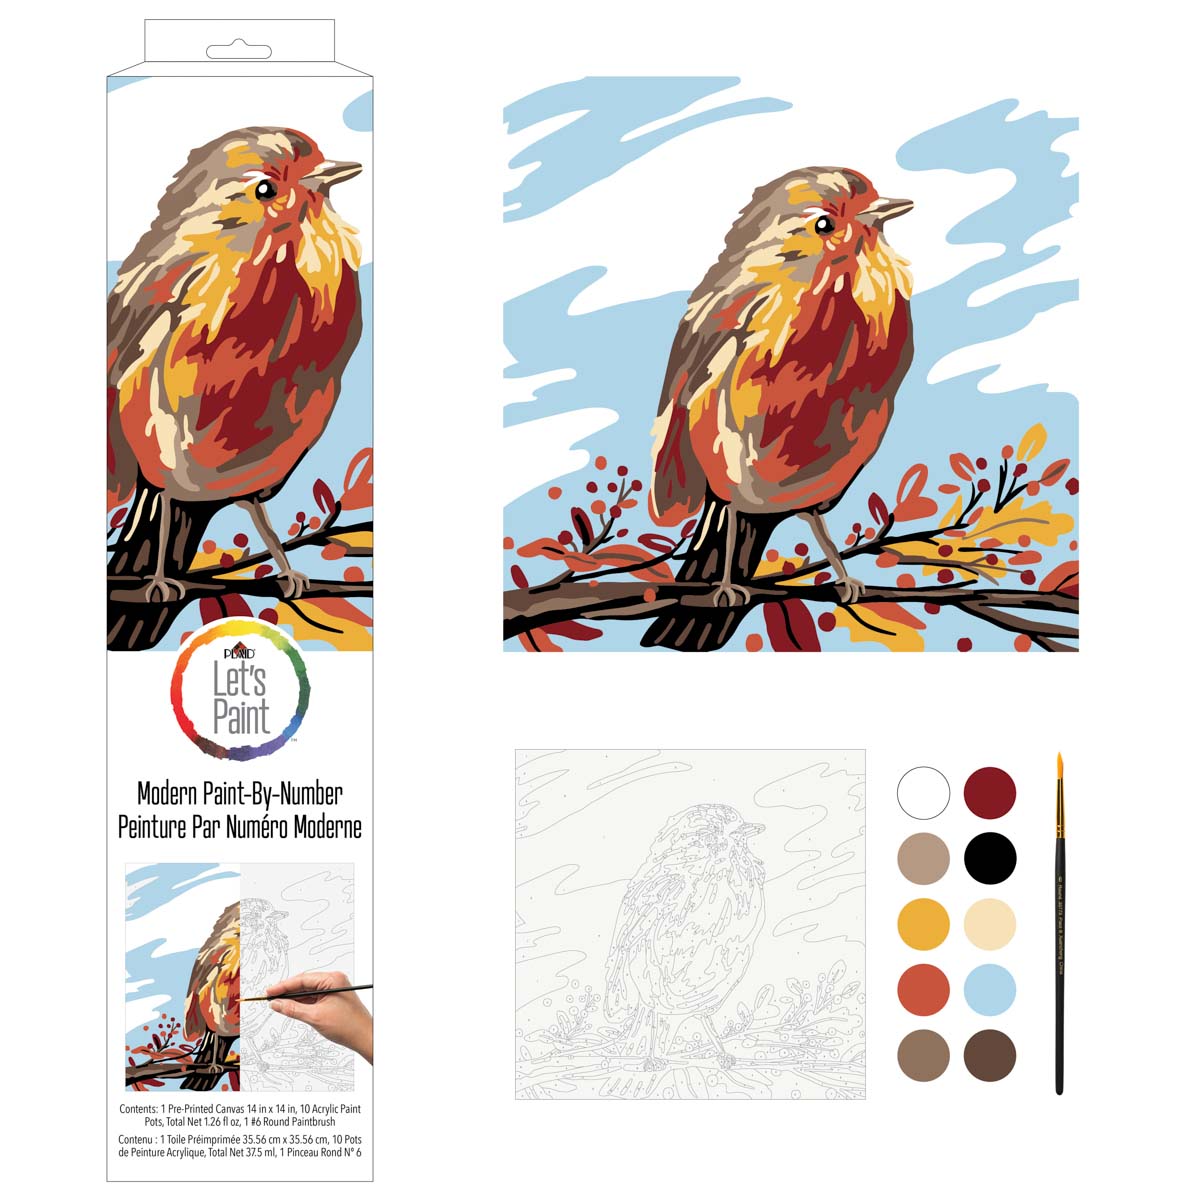 Plaid ® Let's Paint™ Modern Paint-by-Number - Fall Bird - 17914